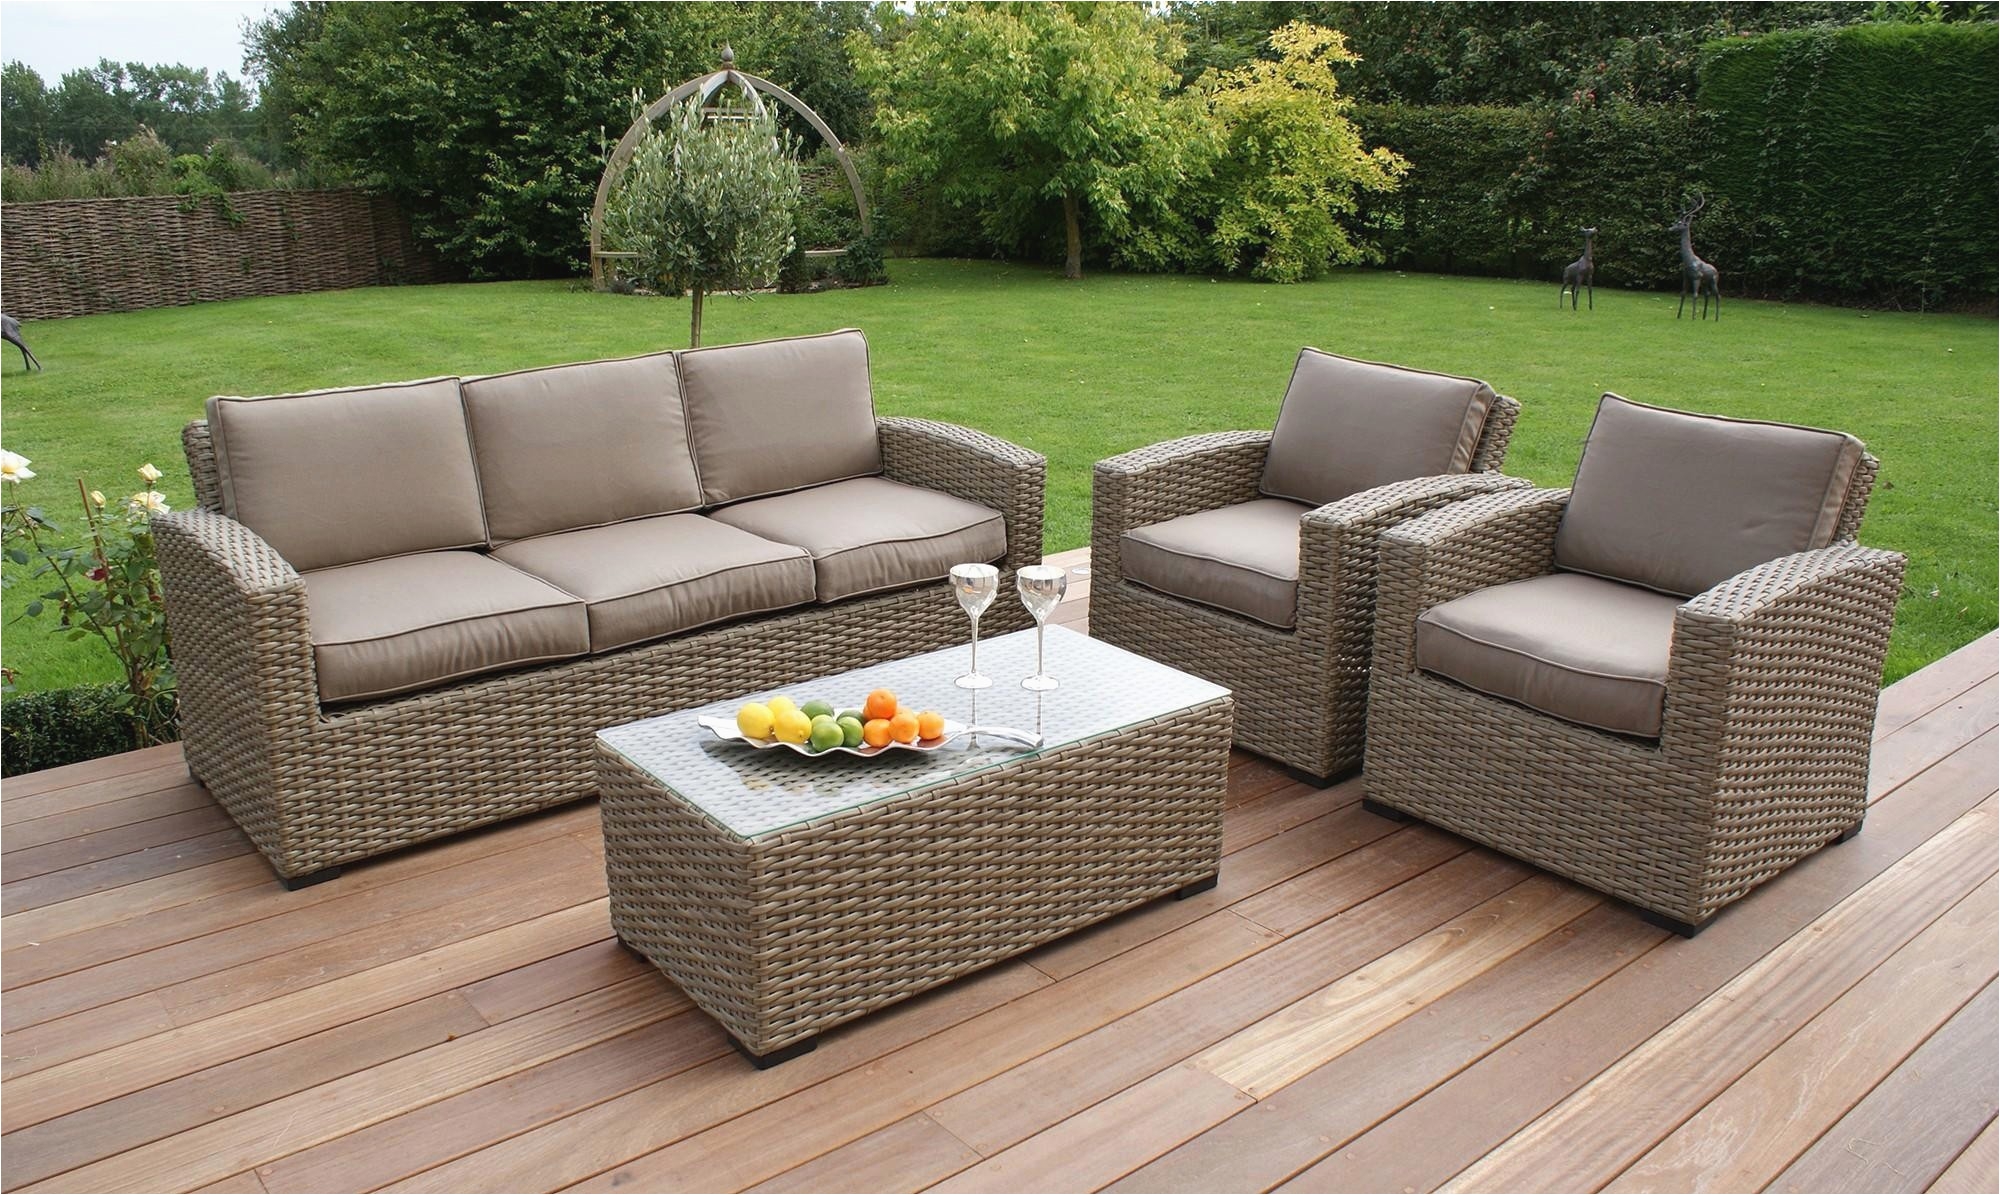 Used Furniture Stores Tucson 26 Best Of Patio Furniture Used Gallery Home Furniture Ideas